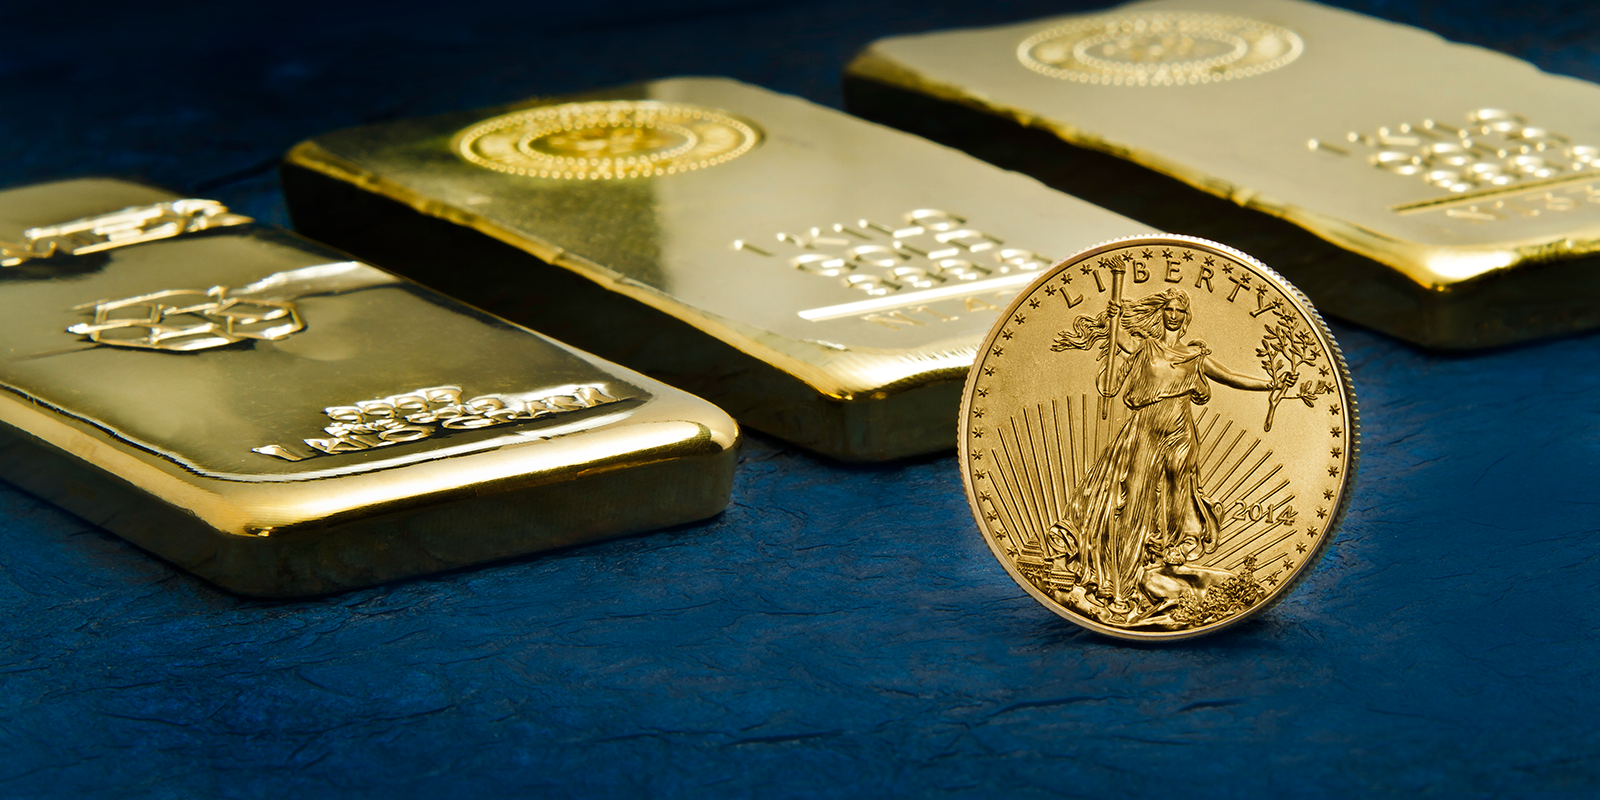 Precious Metals Dealer Apmex Now Accepts Bitcoin for Purchases